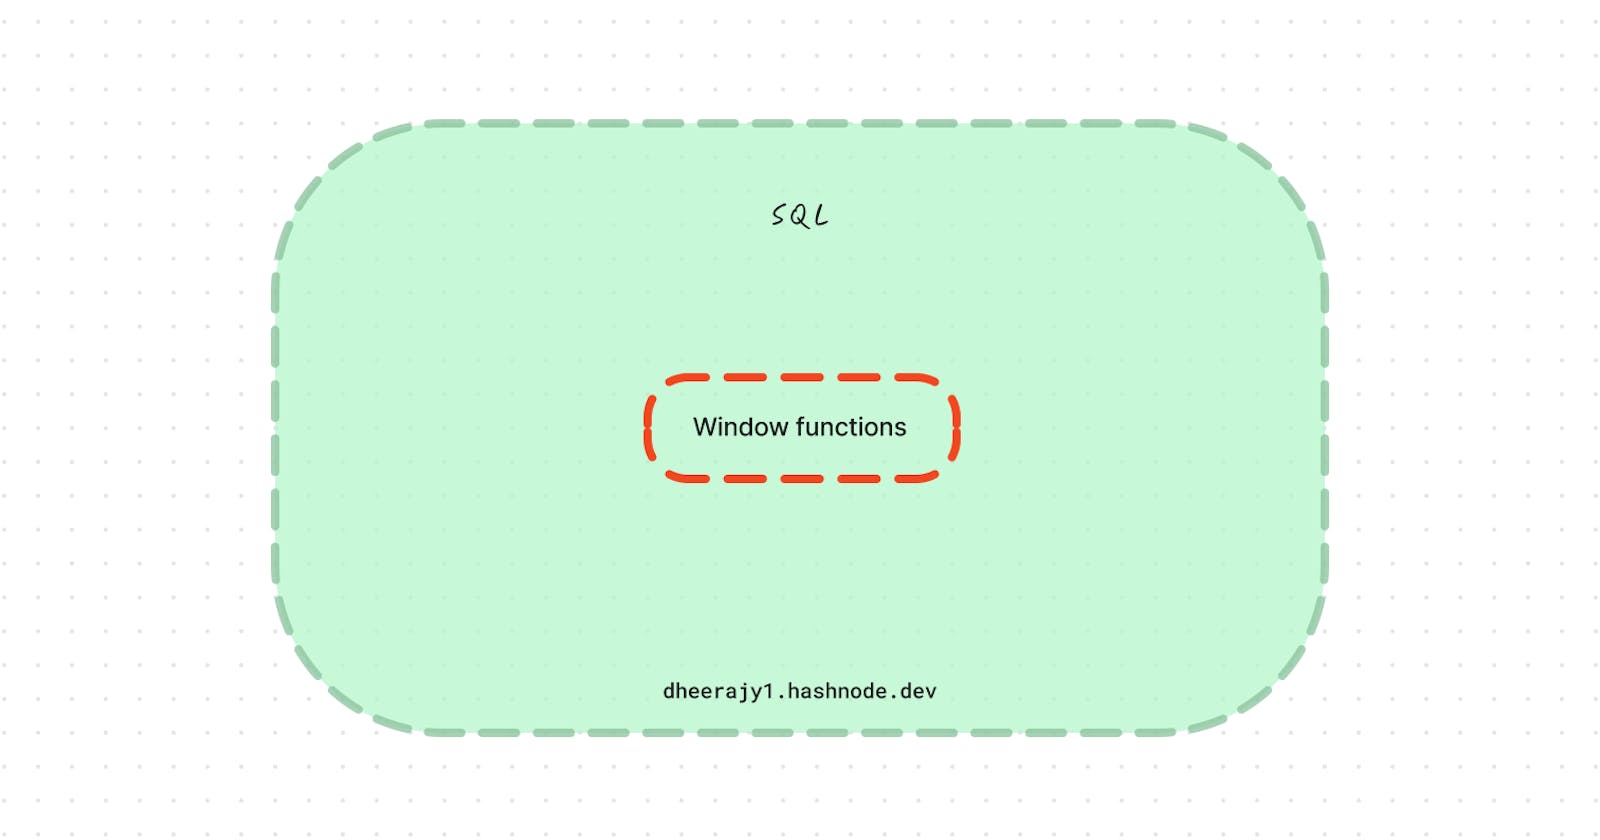 SQL Window Functions visualized